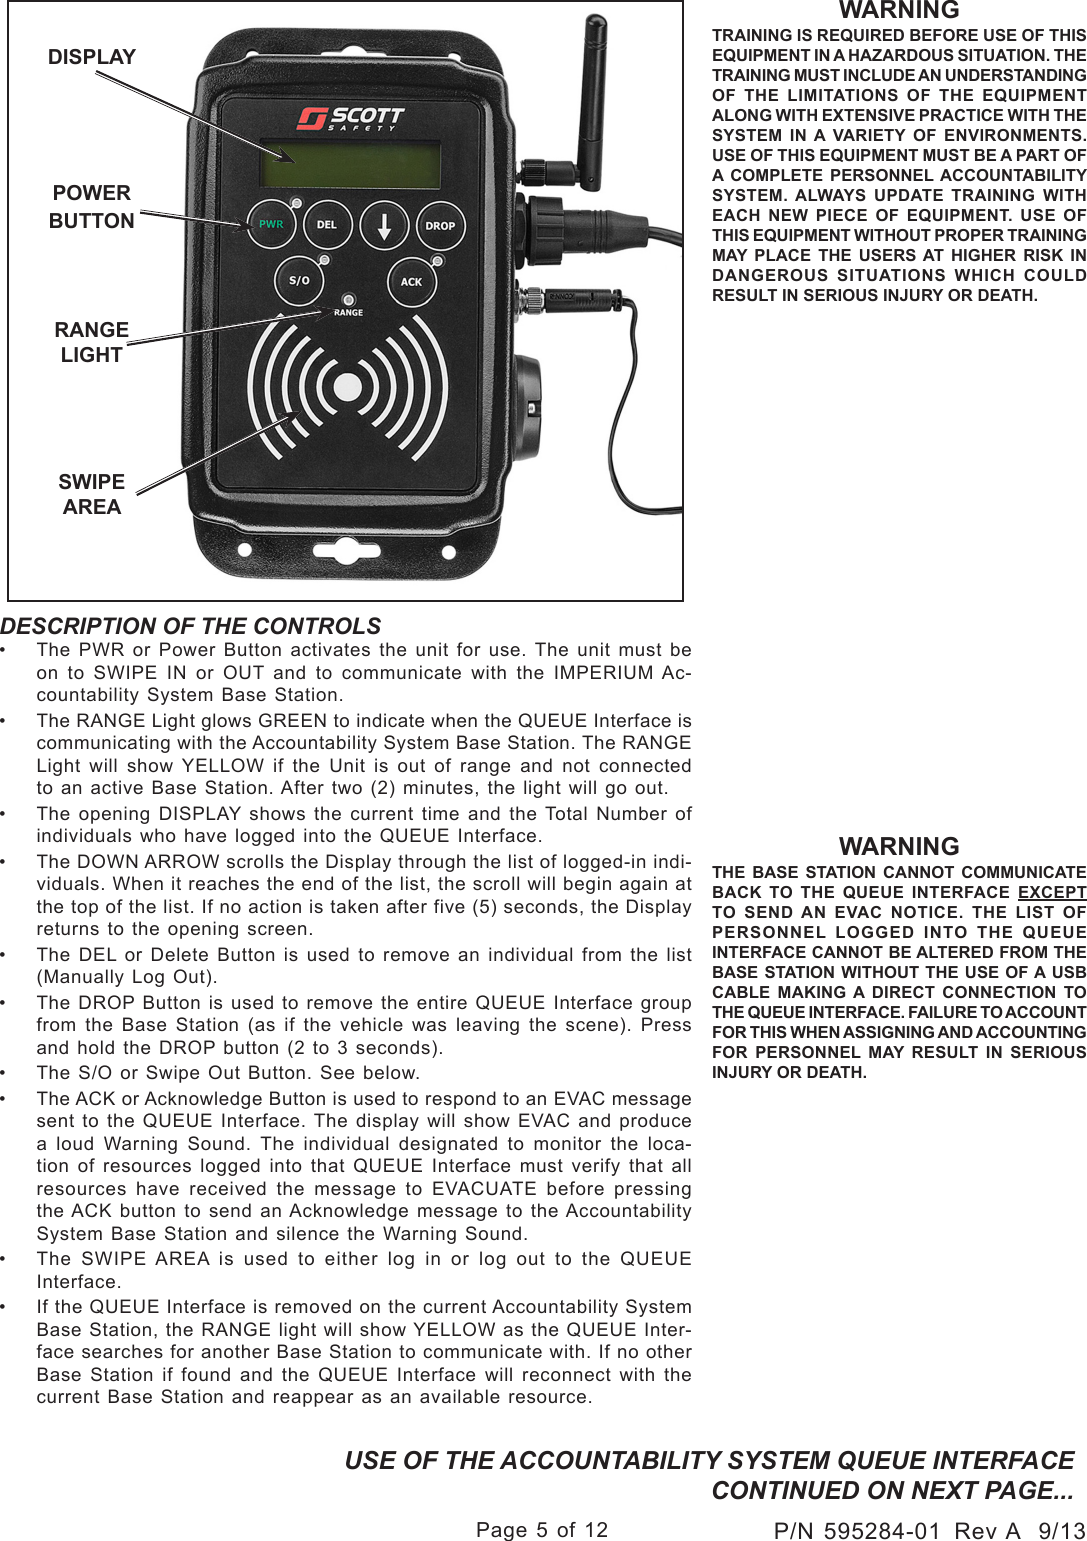 Page 5 of 12P/N 595284-01  Rev A  9/13DESCRIPTION OF THE CONTROLS•  The PWR or Power Button activates the unit for use. The unit must be on to SWIPE IN or OUT and to communicate with the IMPERIUM Ac-countability System Base Station.•  The RANGE Light glows GREEN to indicate when the QUEUE Interface is communicating with the Accountability System Base Station. The RANGE Light will show YELLOW if the Unit is out of range and not connected to an active Base Station. After two (2) minutes, the light will go out.•  The opening DISPLAY shows the current time and the Total Number of individuals who have logged into the QUEUE Interface.•  The DOWN ARROW scrolls the Display through the list of logged-in indi-viduals. When it reaches the end of the list, the scroll will begin again at the top of the list. If no action is taken after five (5) seconds, the Display returns to the opening screen.•  The DEL or Delete Button is used to remove an individual from the list (Manually Log Out).  •  The DROP Button is used to remove the entire QUEUE Interface group from the Base Station (as if the vehicle was leaving the scene). Press and hold the DROP button (2 to 3 seconds).•  The S/O or Swipe Out Button. See below.•  The ACK or Acknowledge Button is used to respond to an EVAC message sent to  the  QUEUE  Interface. The  display  will  show  EVAC  and  produce a loud Warning Sound. The individual designated to monitor the loca-tion of resources logged into that QUEUE Interface must verify that all resources  have  received  the  message  to  EVACUATE  before  pressing the ACK button to send an Acknowledge message to the Accountability System Base Station and silence the Warning Sound.•  The SWIPE AREA is used to either log in or log out to the QUEUE Interface.•  If the QUEUE Interface is removed on the current Accountability System Base Station, the RANGE light will show YELLOW as the QUEUE Inter-face searches for another Base Station to communicate with. If no other Base Station if found and the QUEUE Interface will reconnect with the current Base Station and reappear as an available resource.RANGE LIGHTDISPLAYPOWERBUTTONSWIPE AREAWARNINGTRAINING IS REQUIRED BEFORE USE OF THIS EQUIPMENT IN A HAZARDOUS SITUATION. THE TRAINING MUST INCLUDE AN UNDERSTANDING OF THE LIMITATIONS OF THE EQUIPMENT ALONG WITH EXTENSIVE PRACTICE WITH THE SYSTEM IN A VARIETY OF ENVIRONMENTS. USE OF THIS EQUIPMENT MUST BE A PART OF A COMPLETE PERSONNEL ACCOUNTABILITY SYSTEM. ALWAYS UPDATE TRAINING WITH EACH NEW PIECE OF EQUIPMENT. USE OF THIS EQUIPMENT WITHOUT PROPER TRAINING MAY PLACE THE USERS AT HIGHER RISK IN DANGEROUS SITUATIONS WHICH COULD RESULT IN SERIOUS INJURY OR DEATH.USE OF THE ACCOUNTABILITY SYSTEM QUEUE INTERFACE CONTINUED ON NEXT PAGE...WARNINGTHE BASE STATION CANNOT COMMUNICATE BACK TO THE QUEUE INTERFACE EXCEPT TO SEND AN EVAC NOTICE. THE LIST OF PERSONNEL LOGGED INTO THE QUEUE INTERFACE CANNOT BE ALTERED FROM THE BASE STATION WITHOUT THE USE OF A USB CABLE MAKING A DIRECT CONNECTION TO THE QUEUE INTERFACE. FAILURE TO ACCOUNT FOR THIS WHEN ASSIGNING AND ACCOUNTING FOR PERSONNEL MAY RESULT IN SERIOUS INJURY OR DEATH.